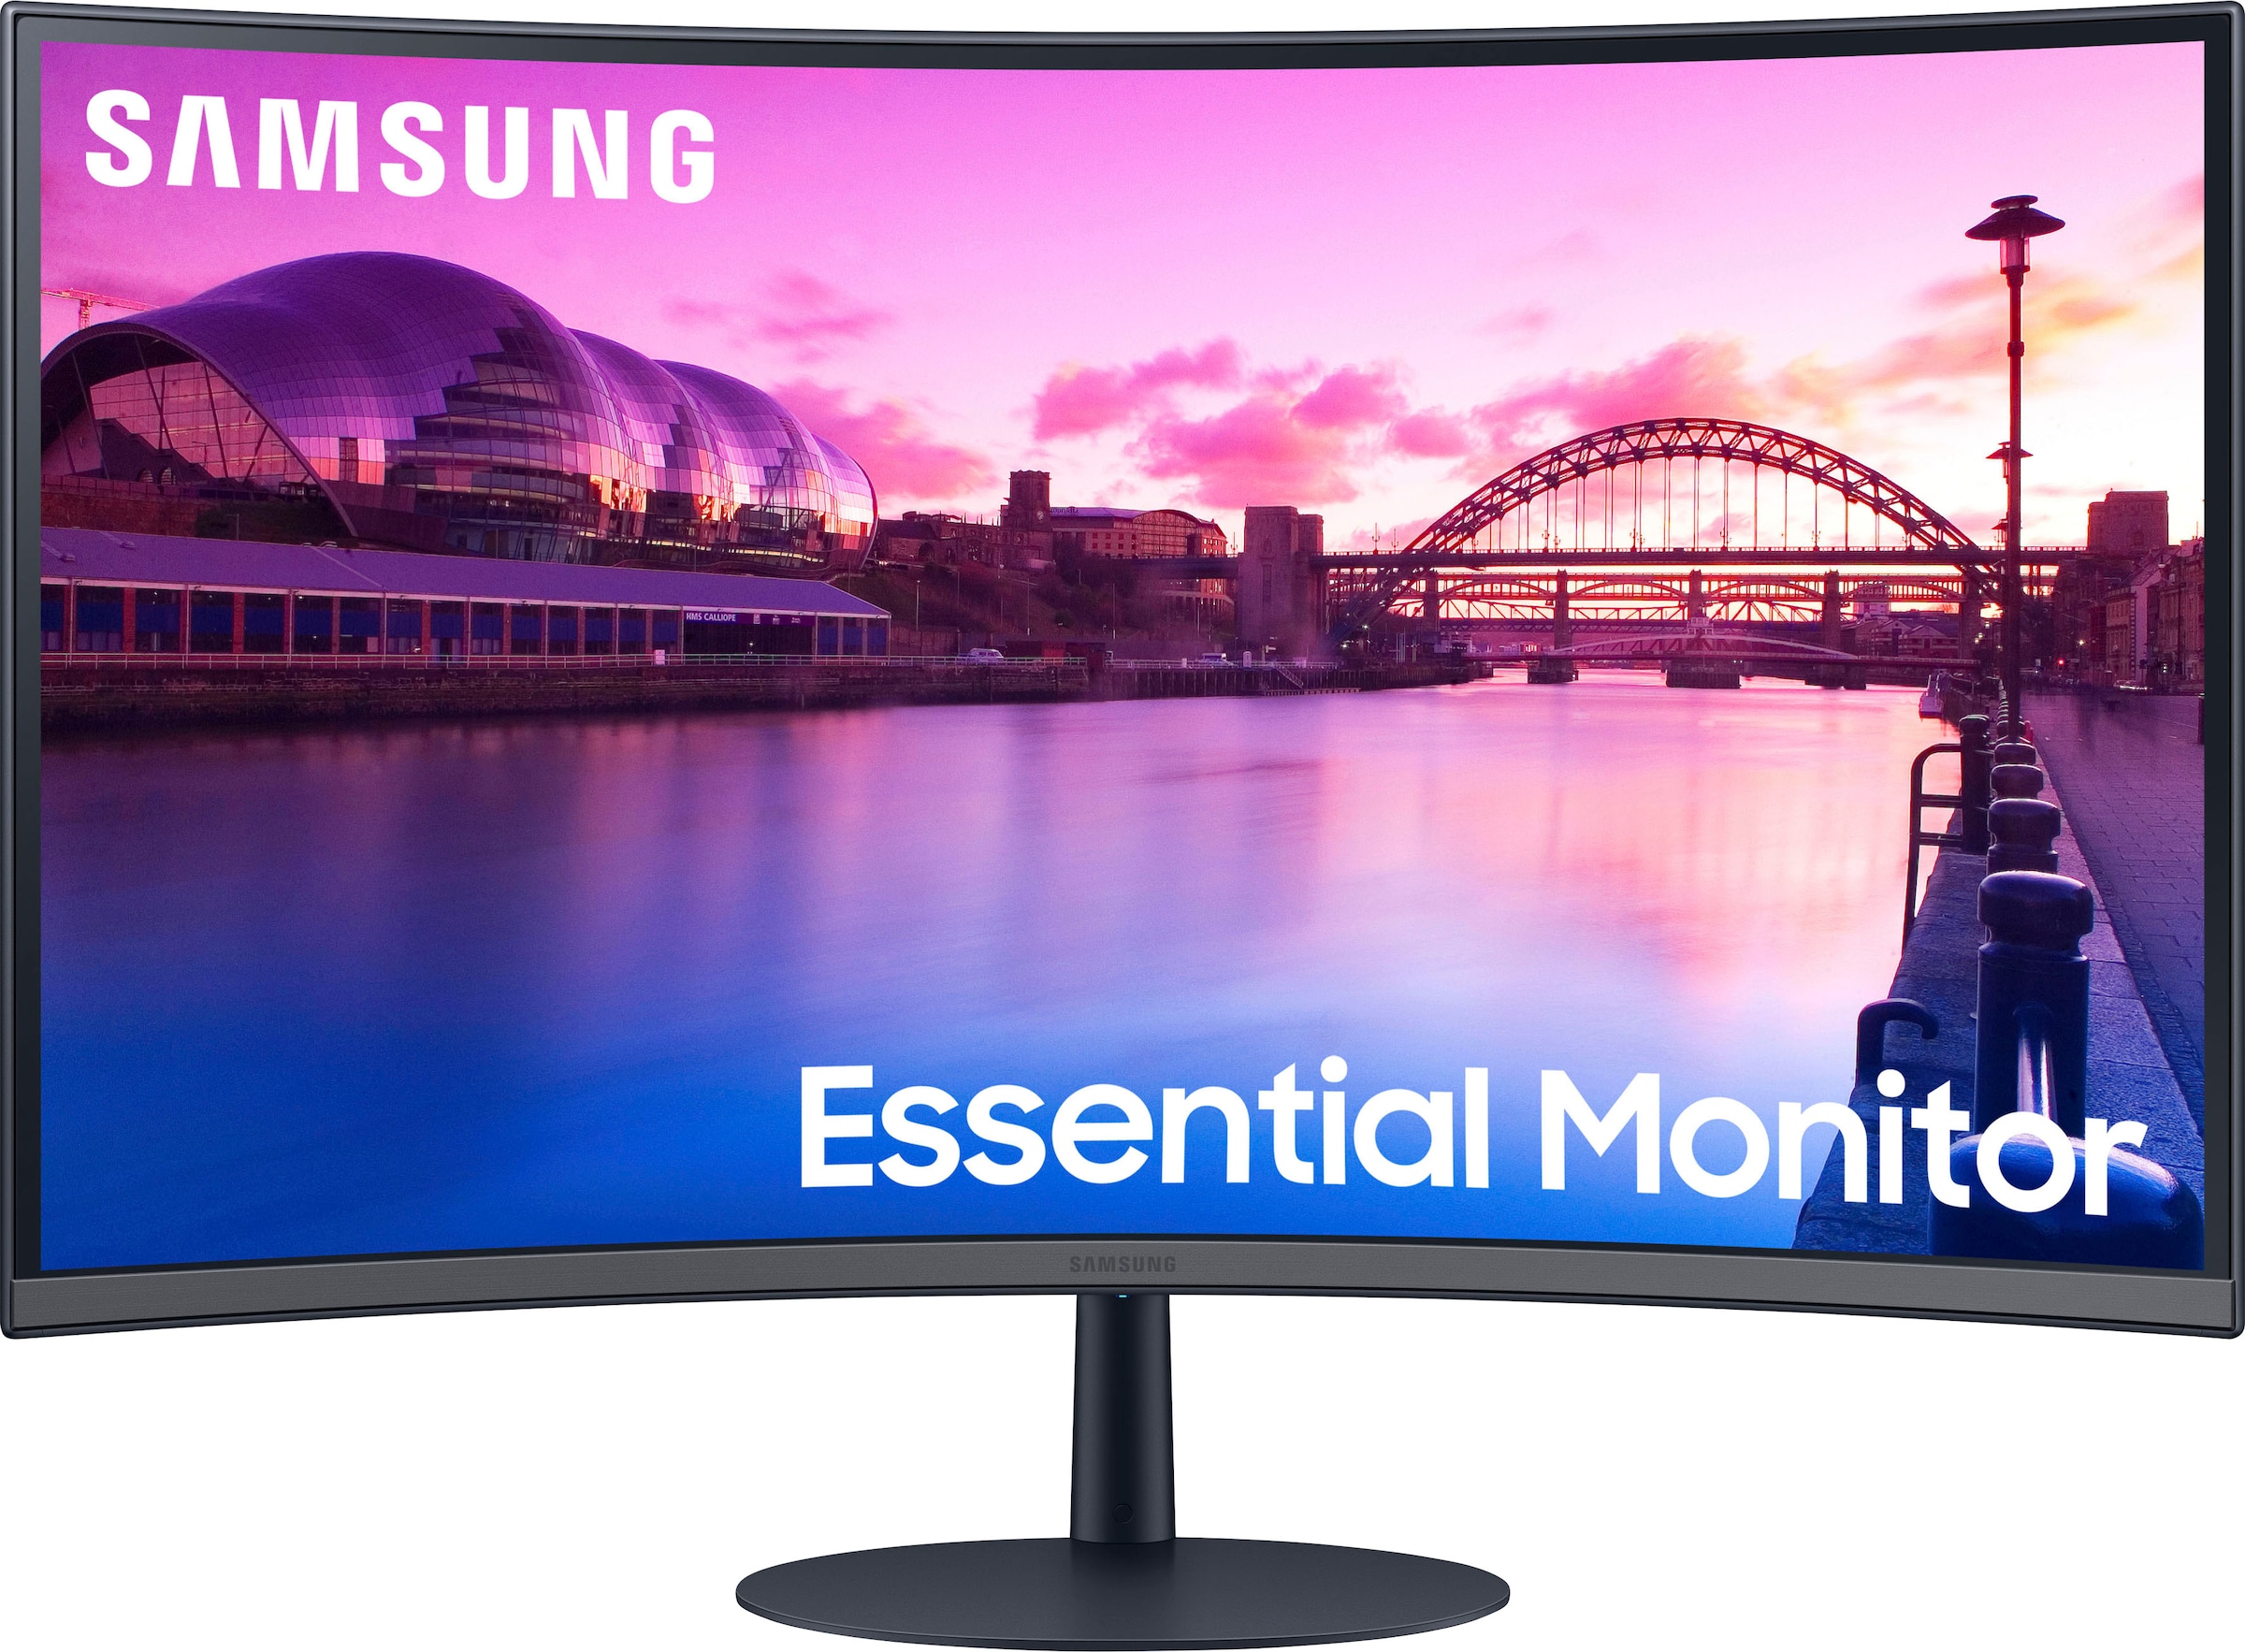 ms 1080 x 75 OTTO Reaktionszeit, 4 1920 Curved-LED-Monitor Full Hz Zoll, »S27C390EAU«, cm/27 68,6 Samsung px, bei online HD,